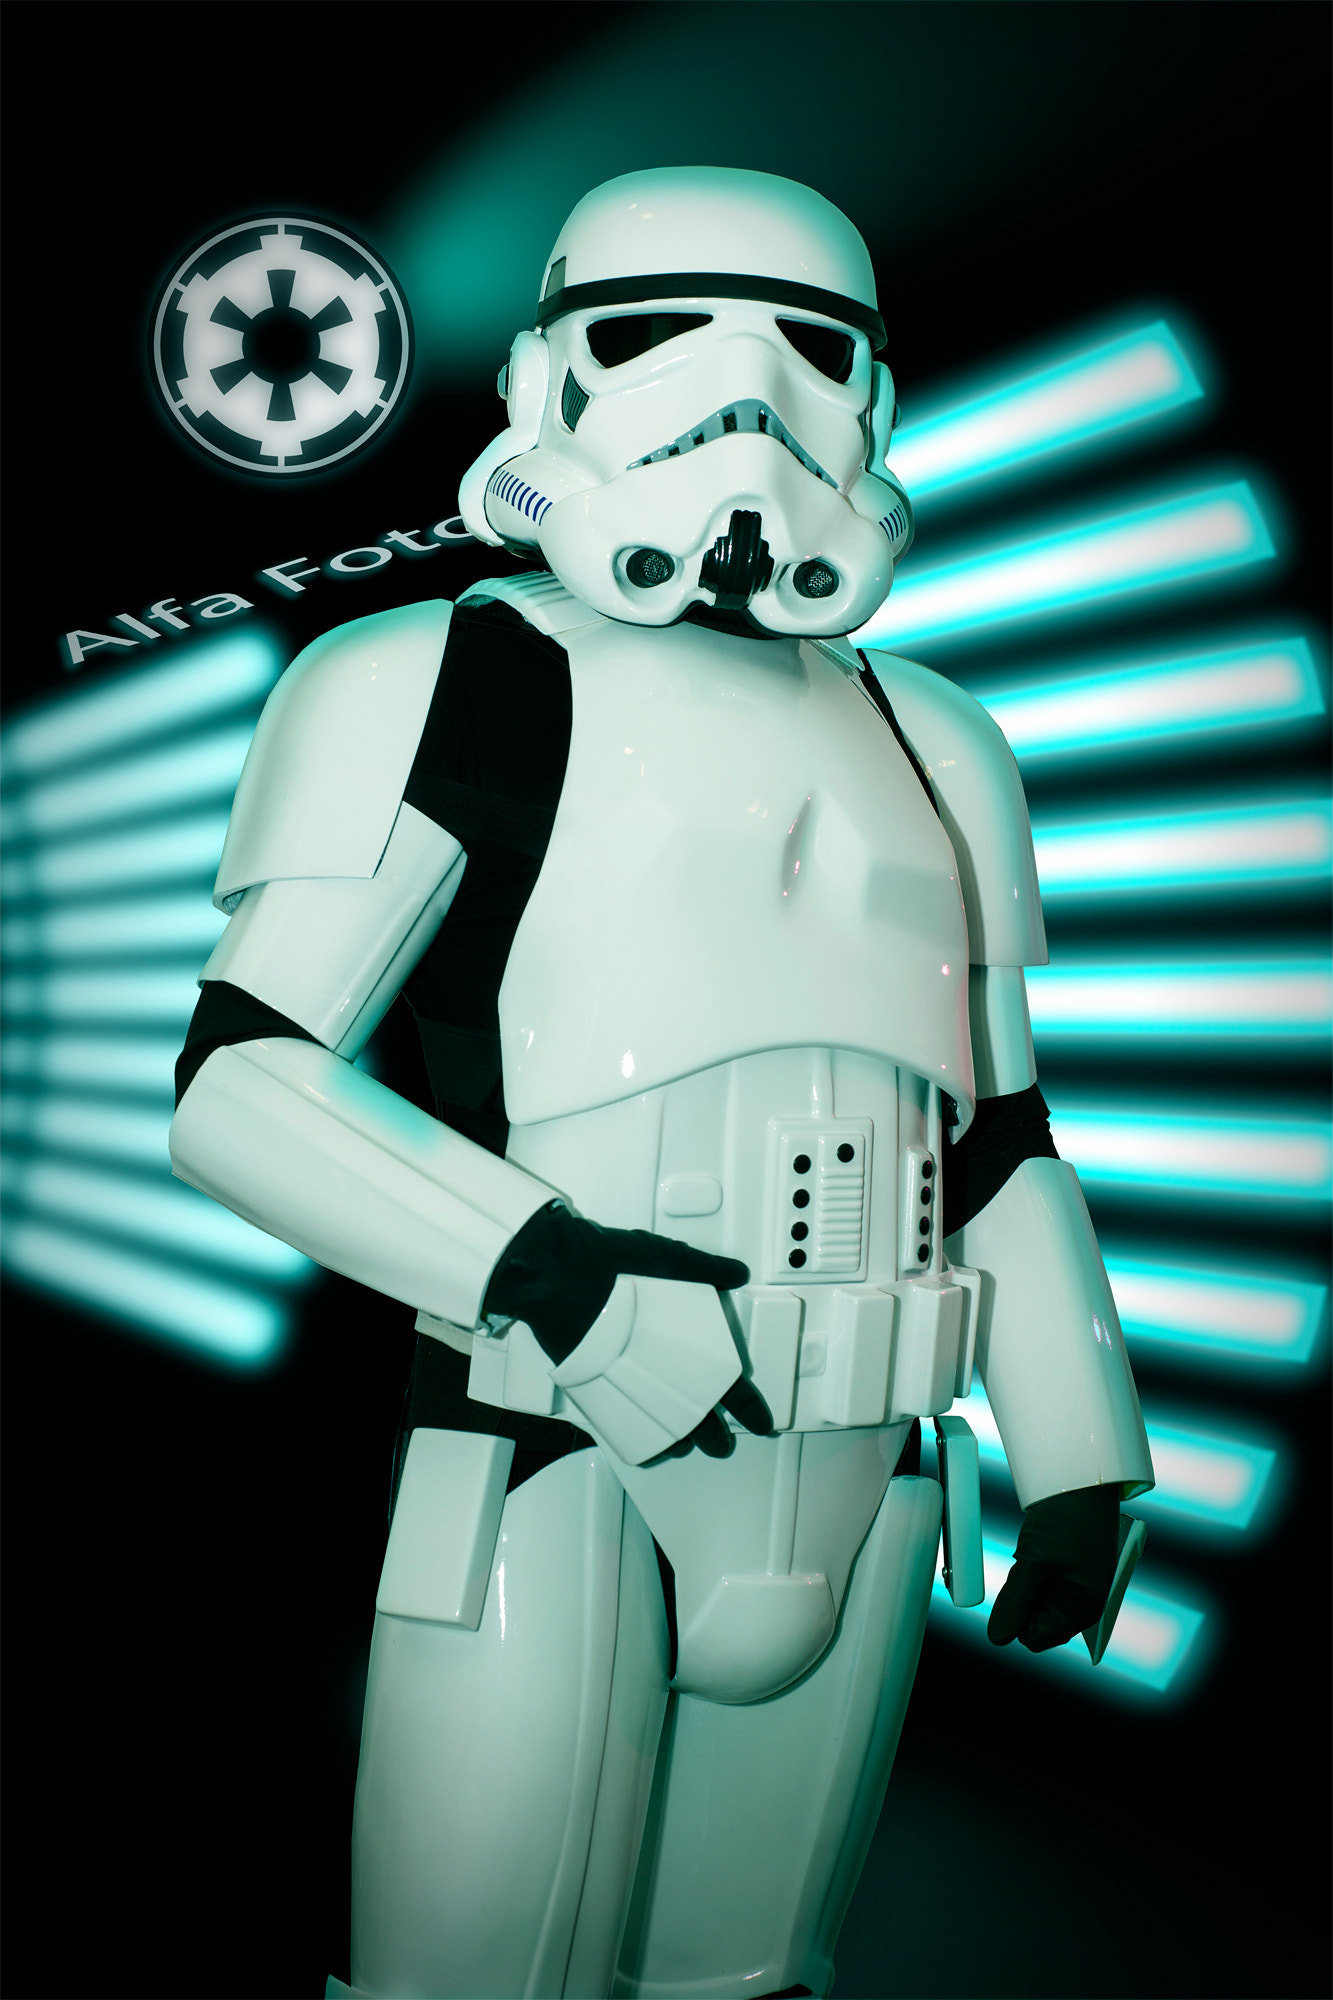 Sony a99 II sample photo. Stormtrooper photography